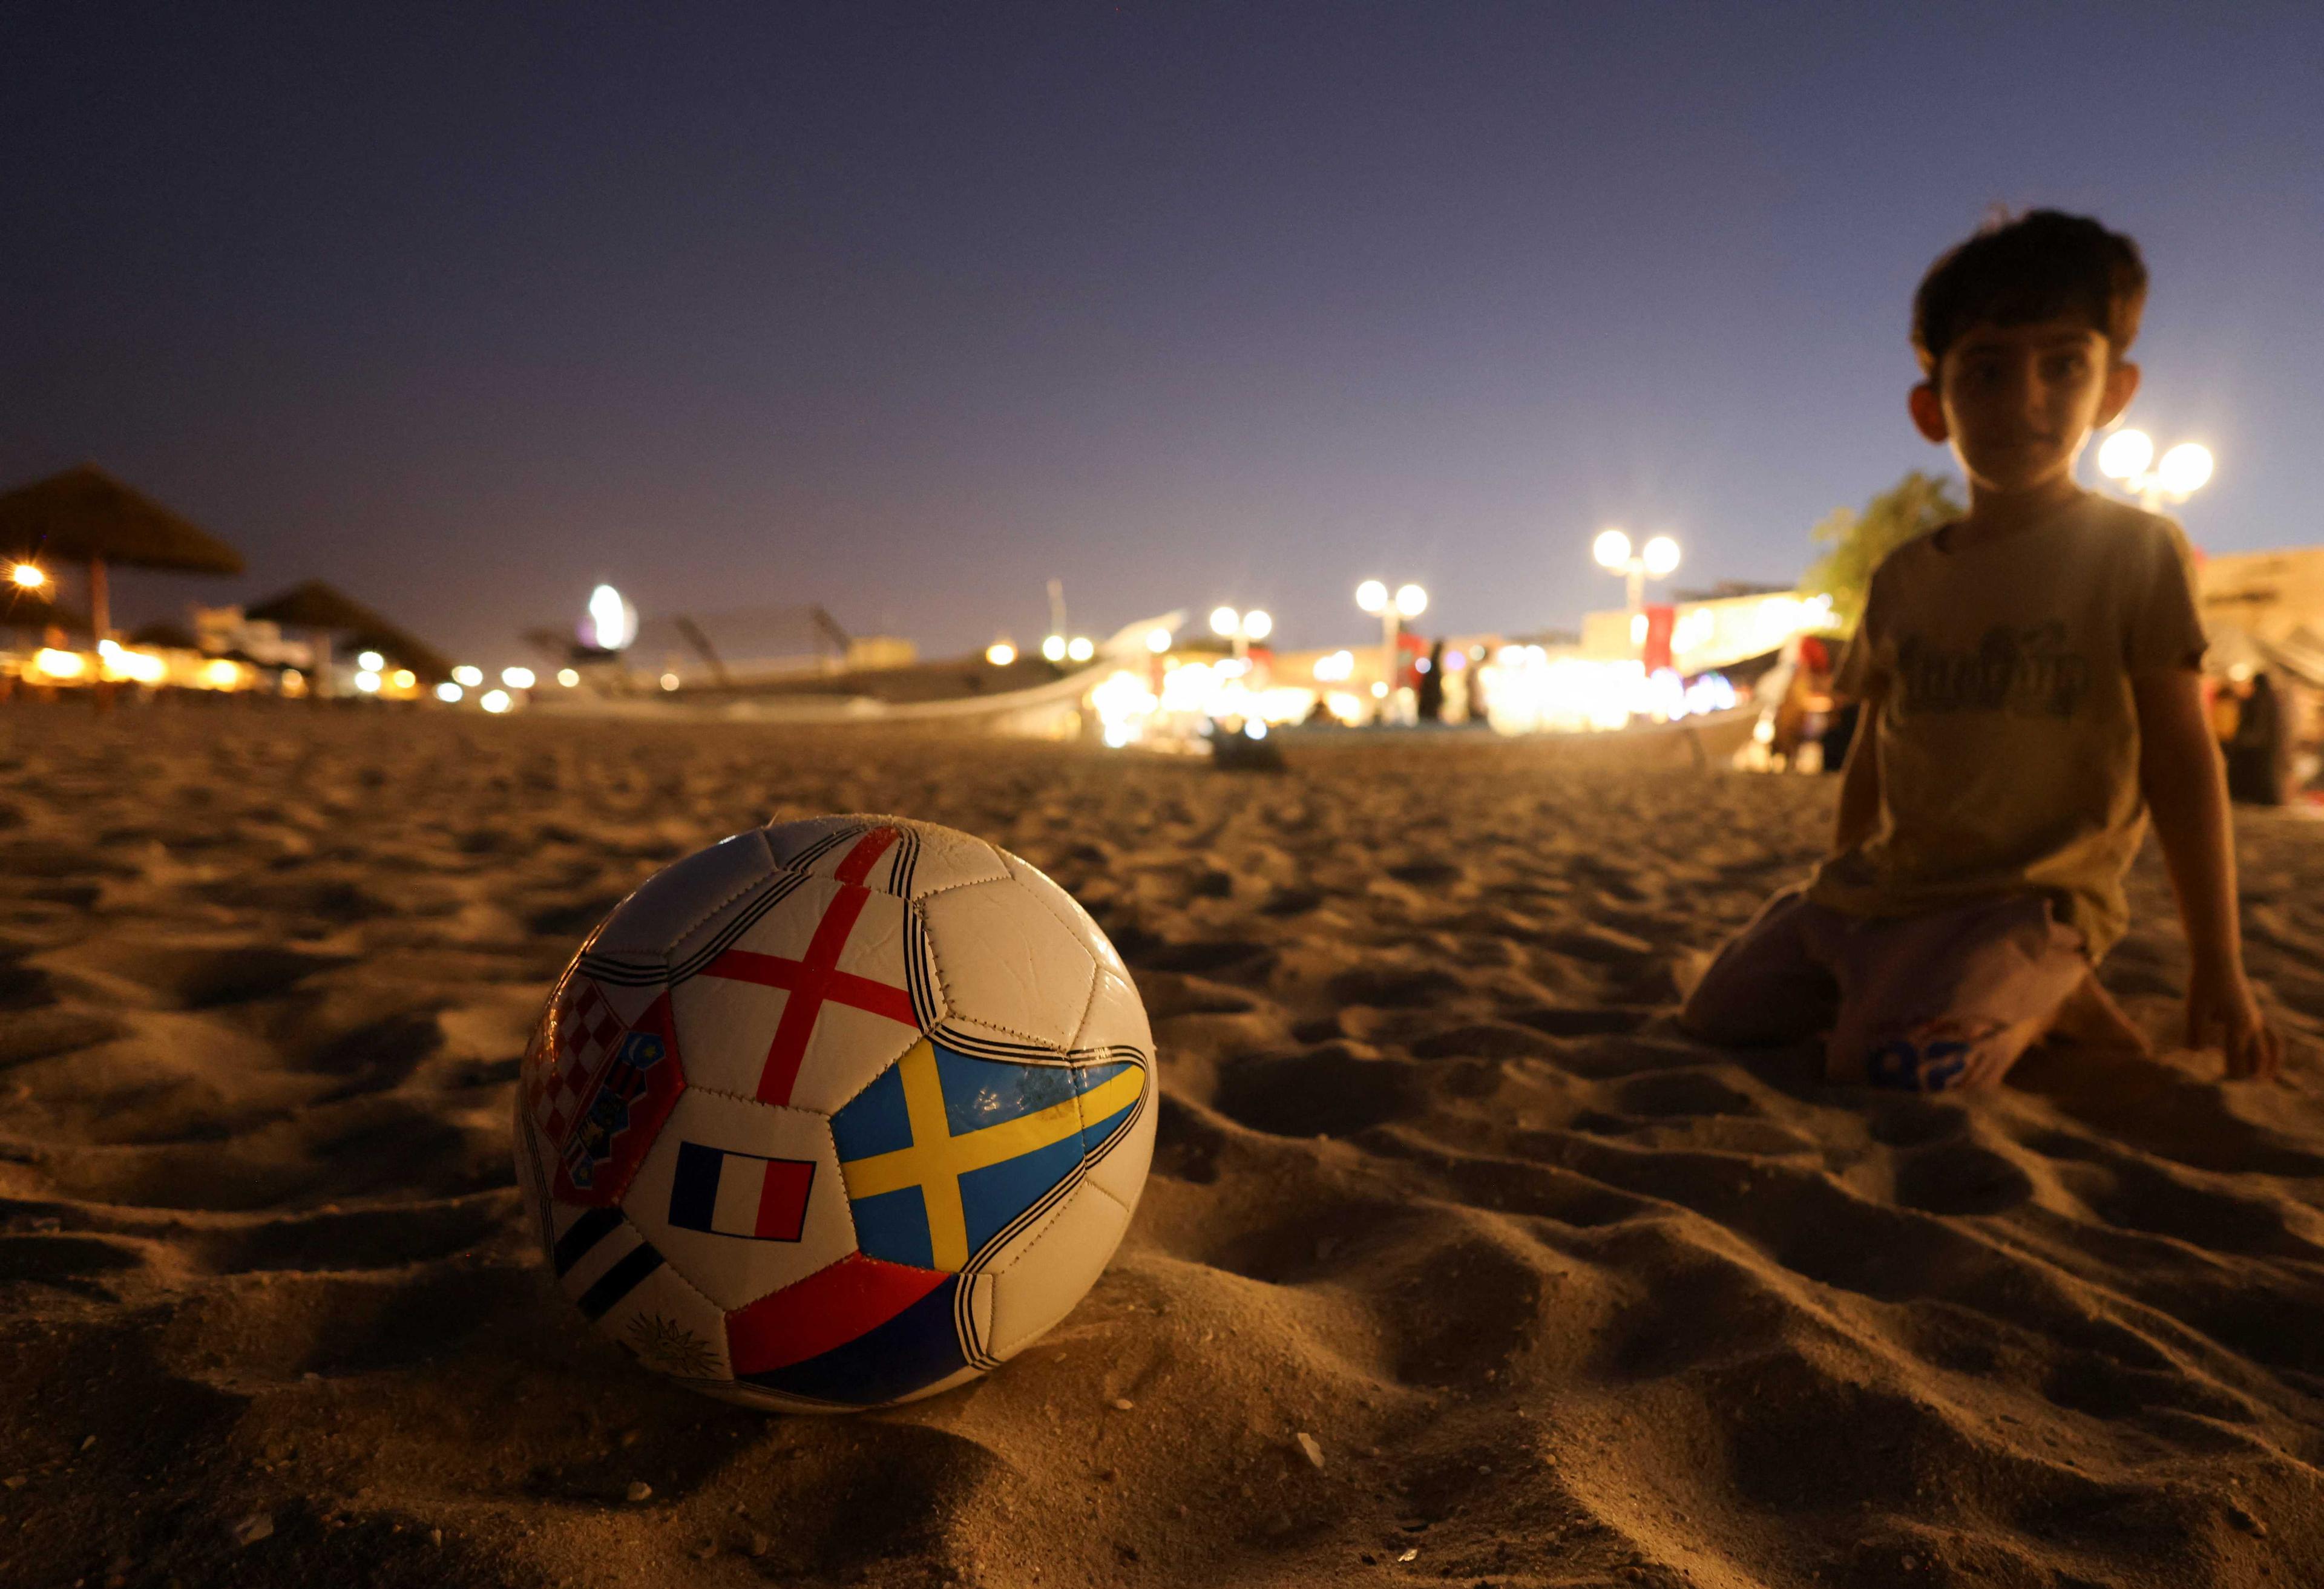 A boy plays with a football decorated with flags, ahead of 2022 Fifa World Cup soccer tournament, in Al Wakrah, south of Doha, Qatar, Nov 10. Photo: Reuters